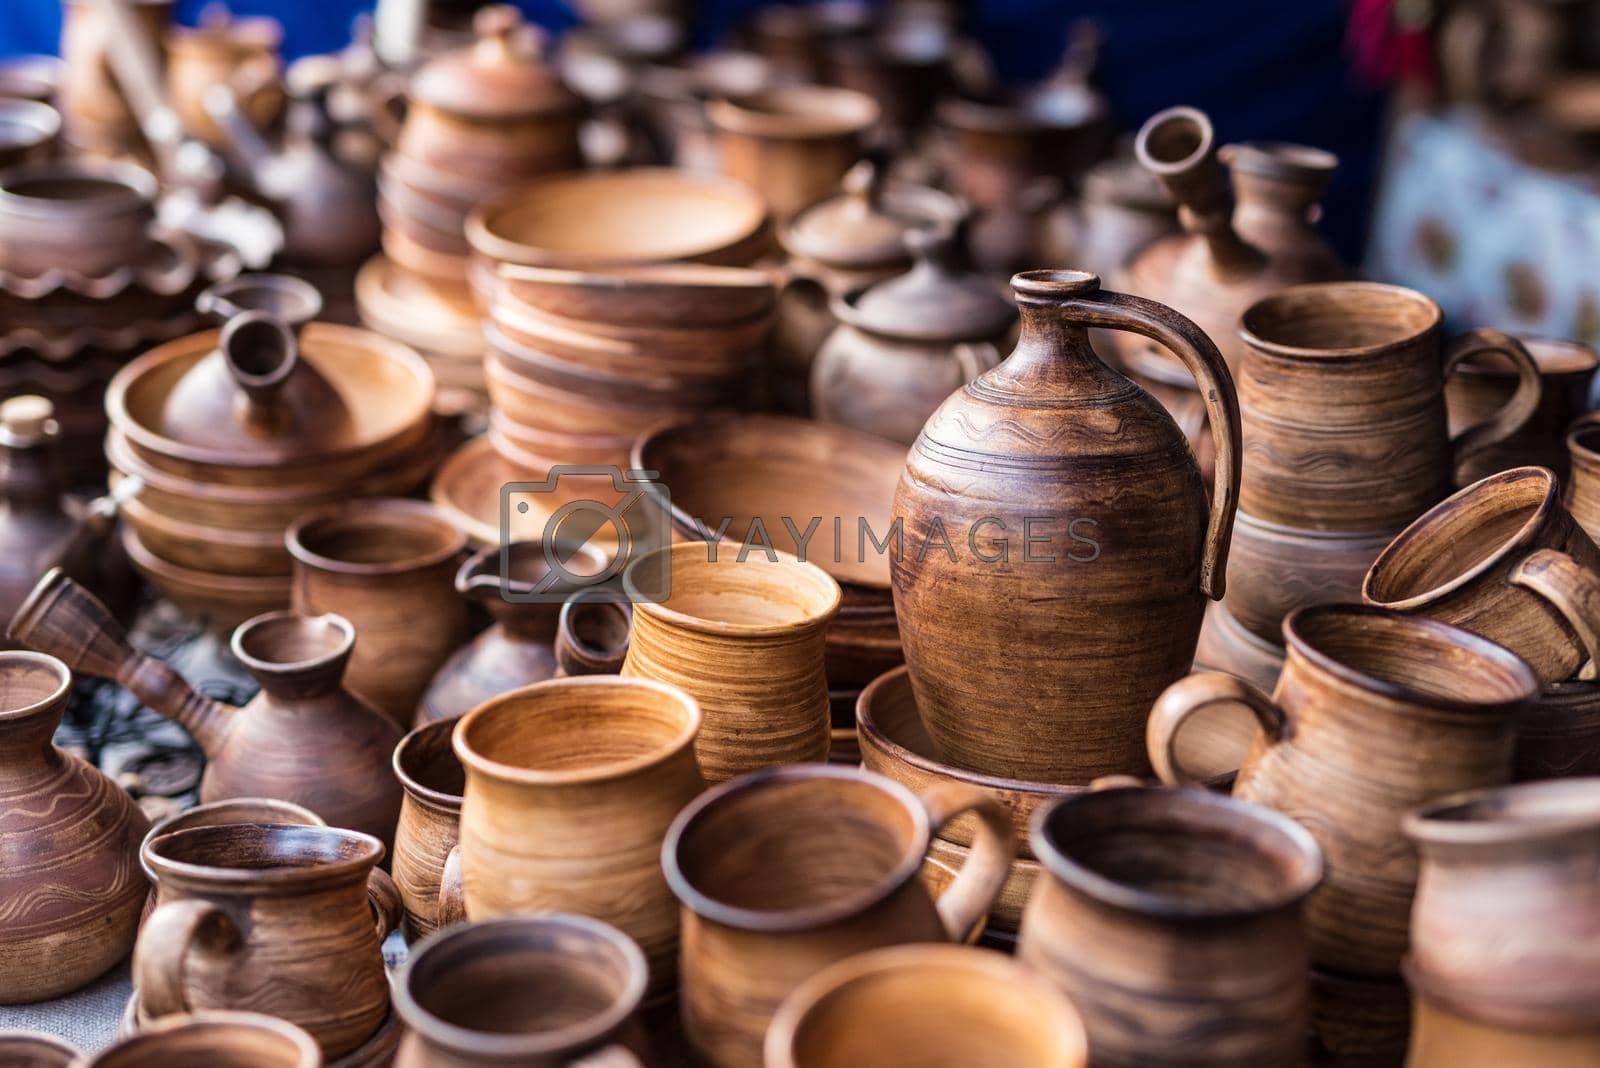 Royalty free image of variety of wooden kitchenware by GekaSkr